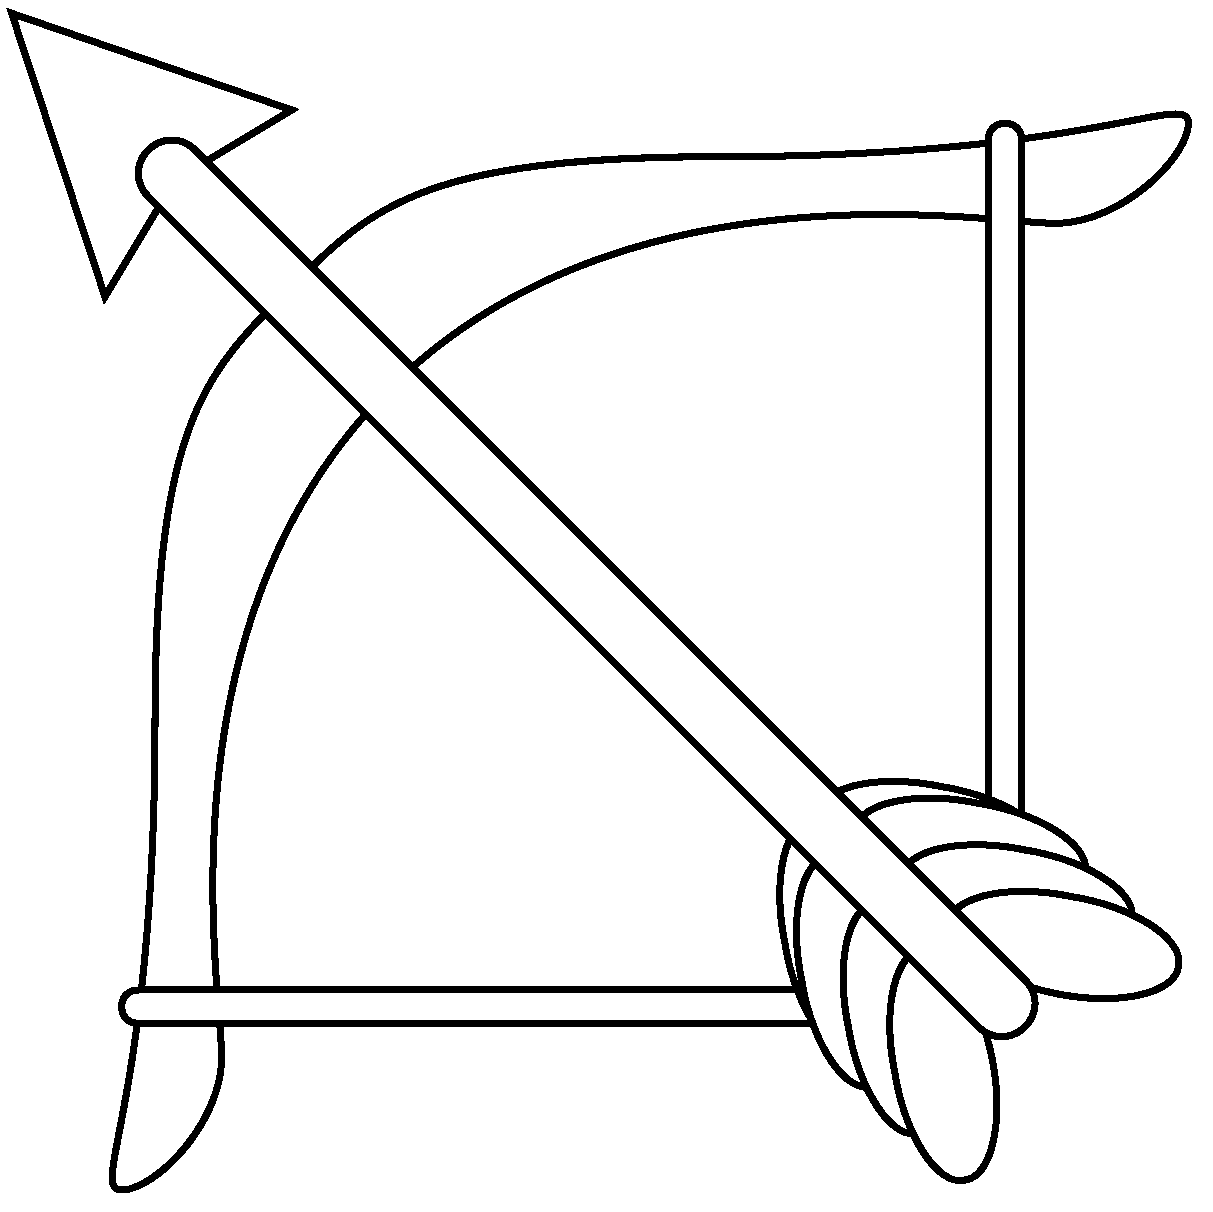 Bow And Arrow Picture For Children Coloring Page